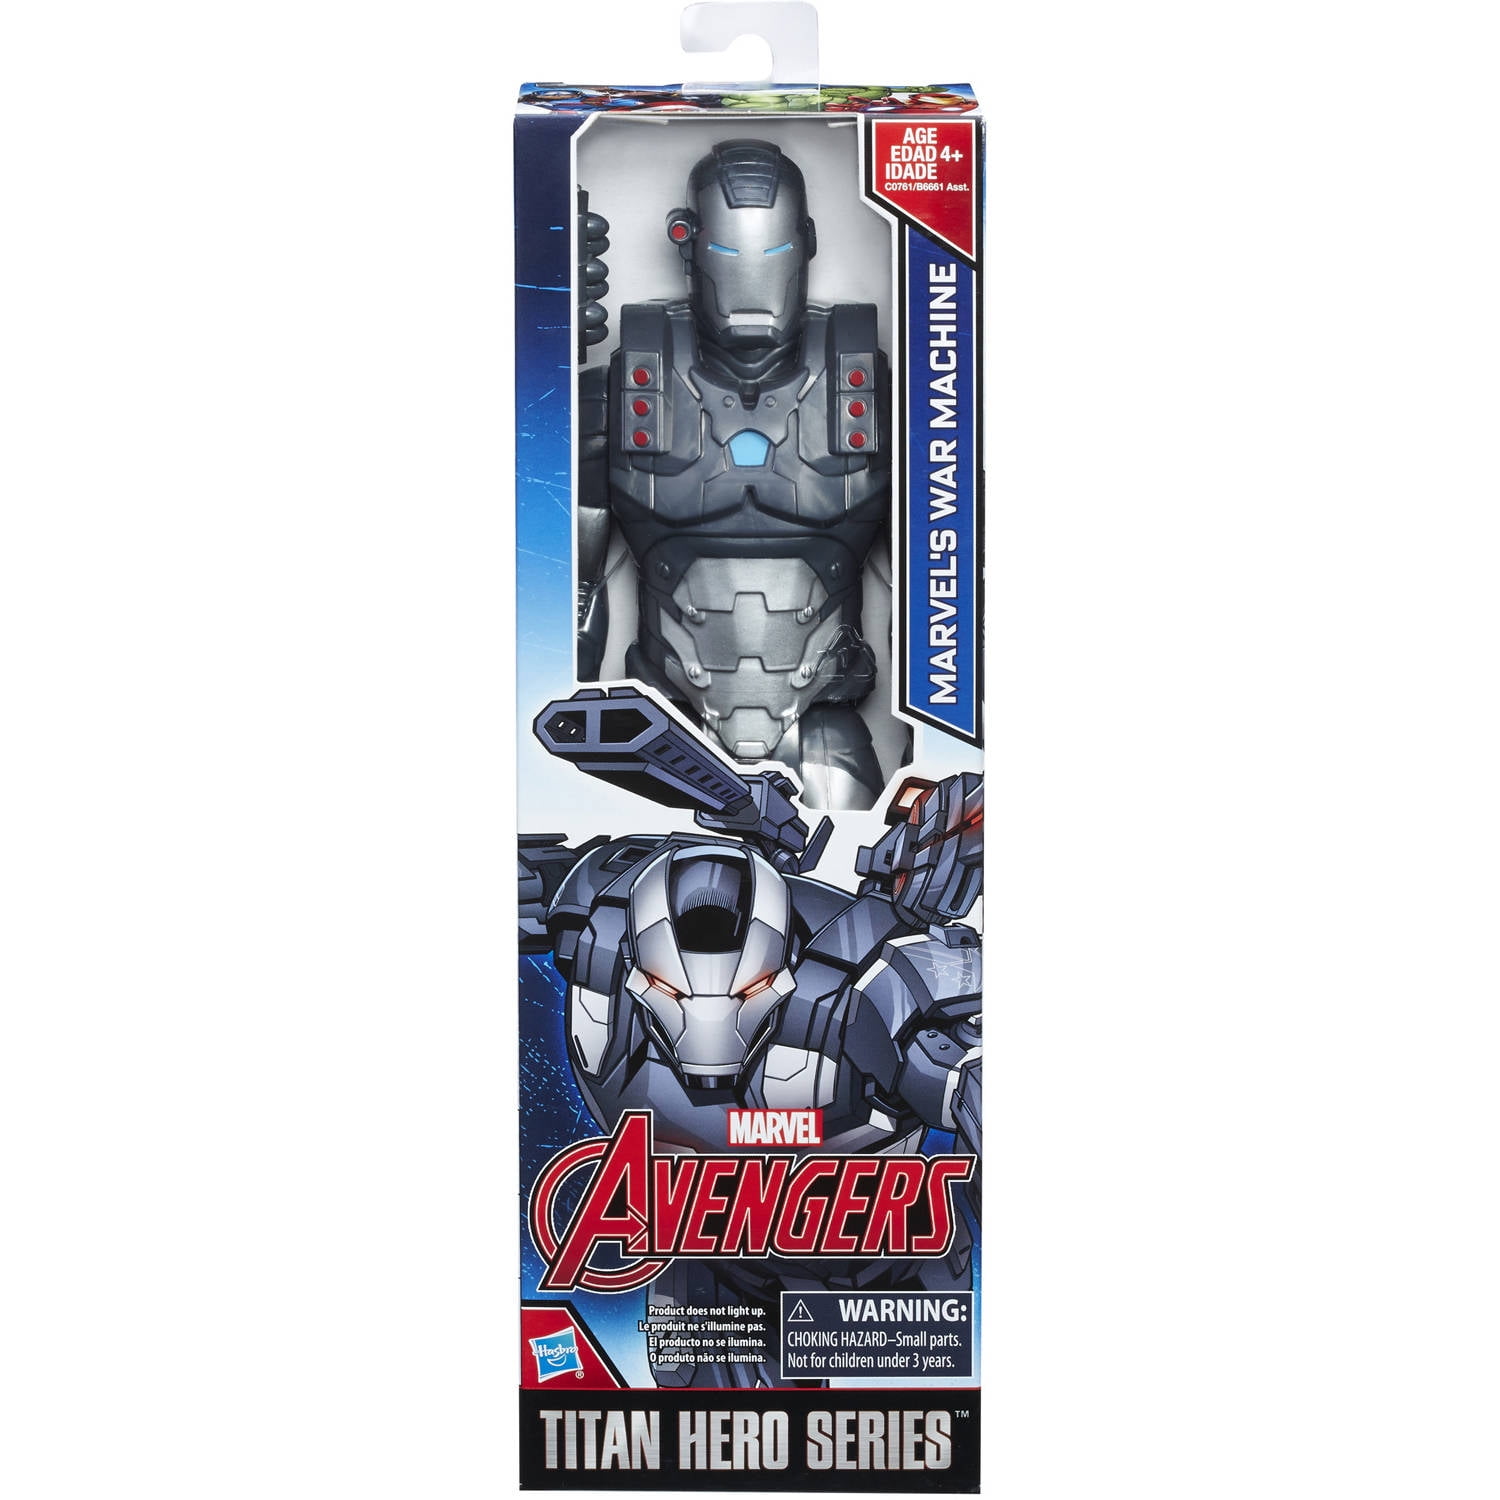 TITAN WAR MACHINE 12 INCH TOY BY MARVEL WITH BATTERY code 82722b